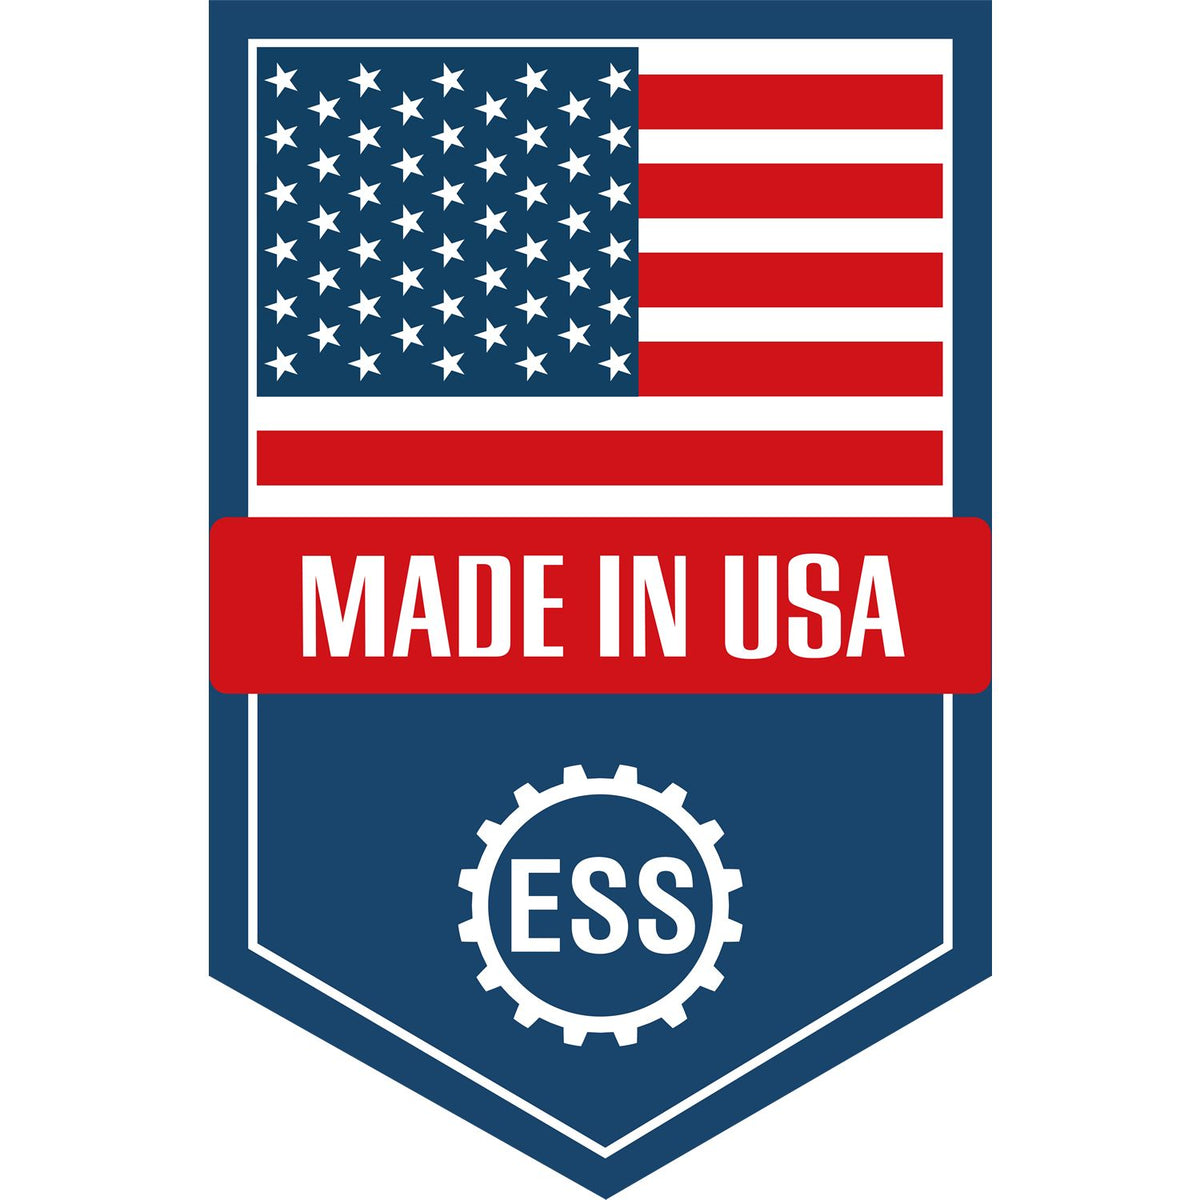 An icon or graphic with an american flag and text reading Made in USA for the Premium MaxLight Pre-Inked Illinois Landscape Architectural Stamp